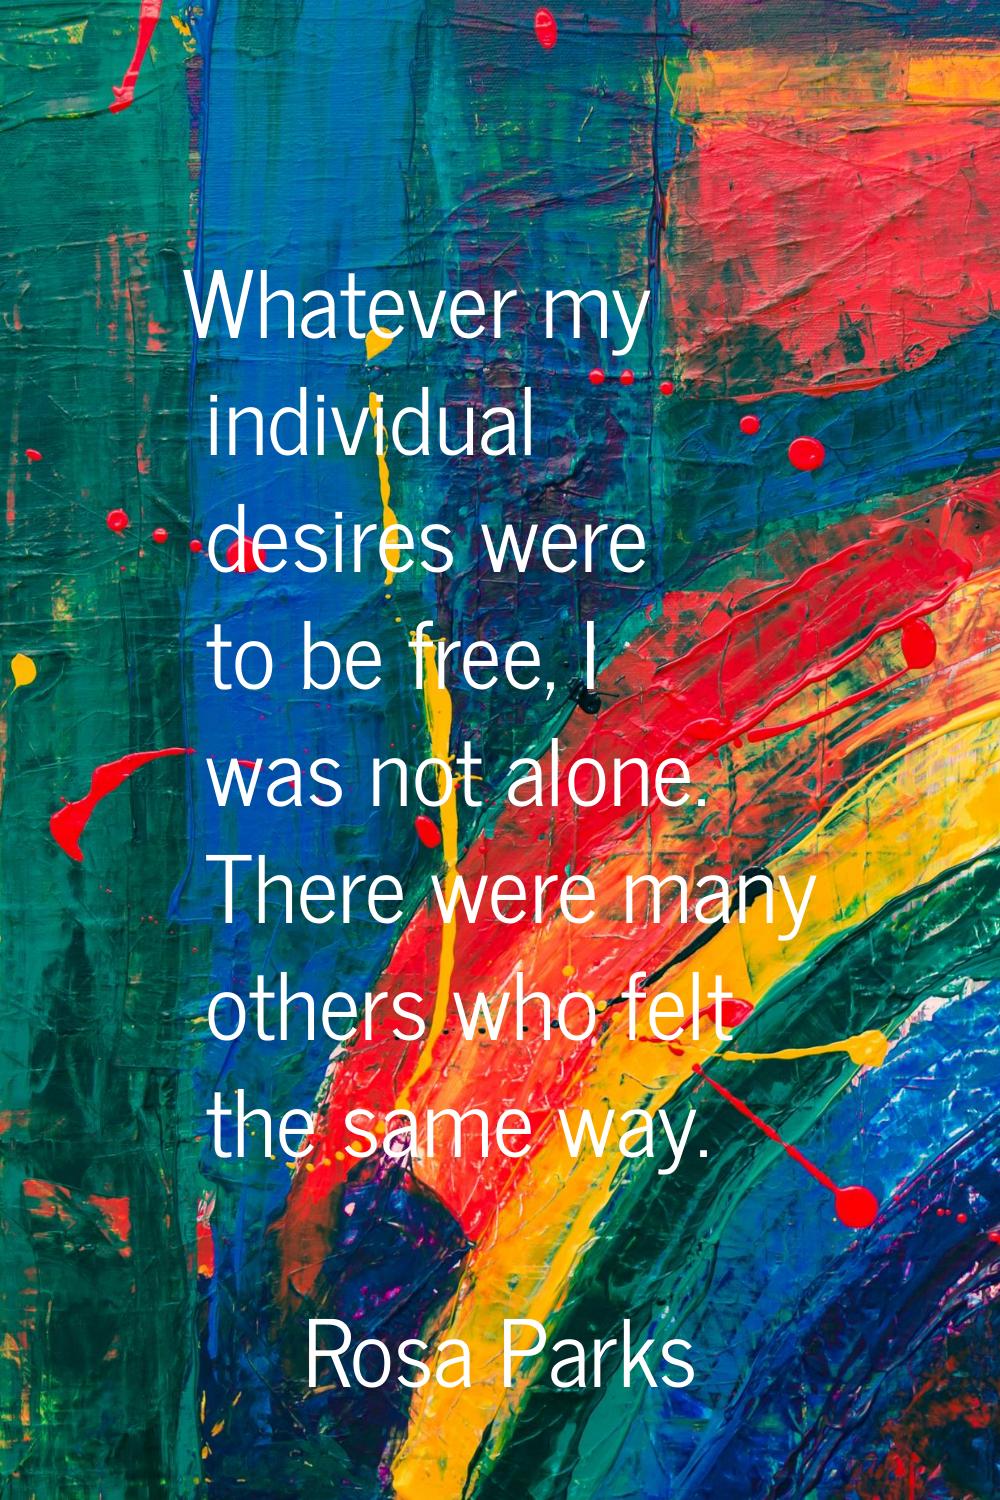 Whatever my individual desires were to be free, I was not alone. There were many others who felt th